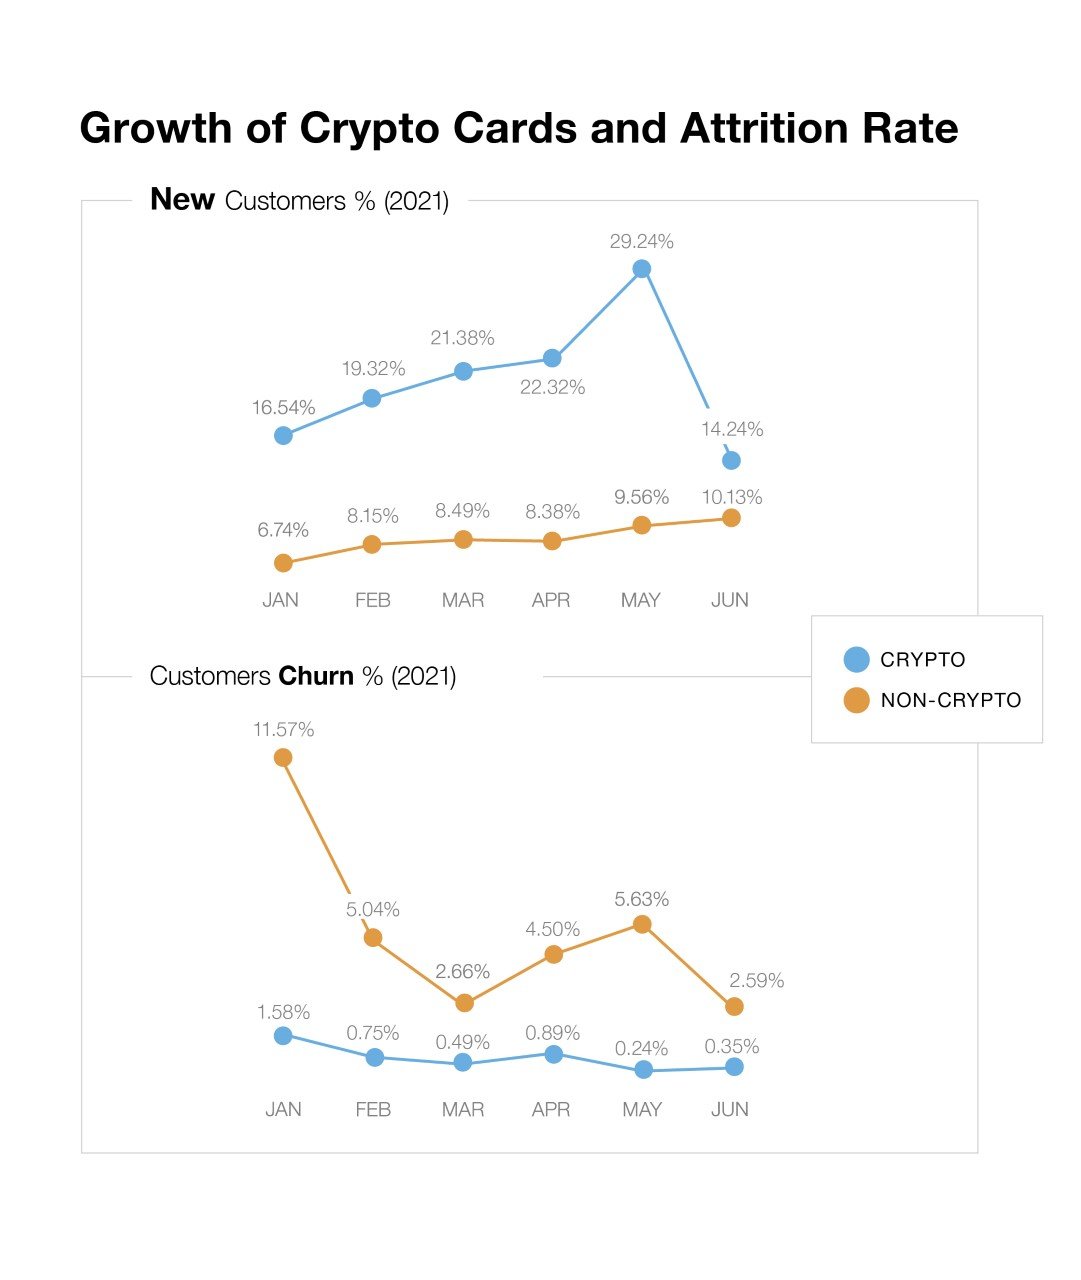 Growth of Crypto Cards and Attrition Rate